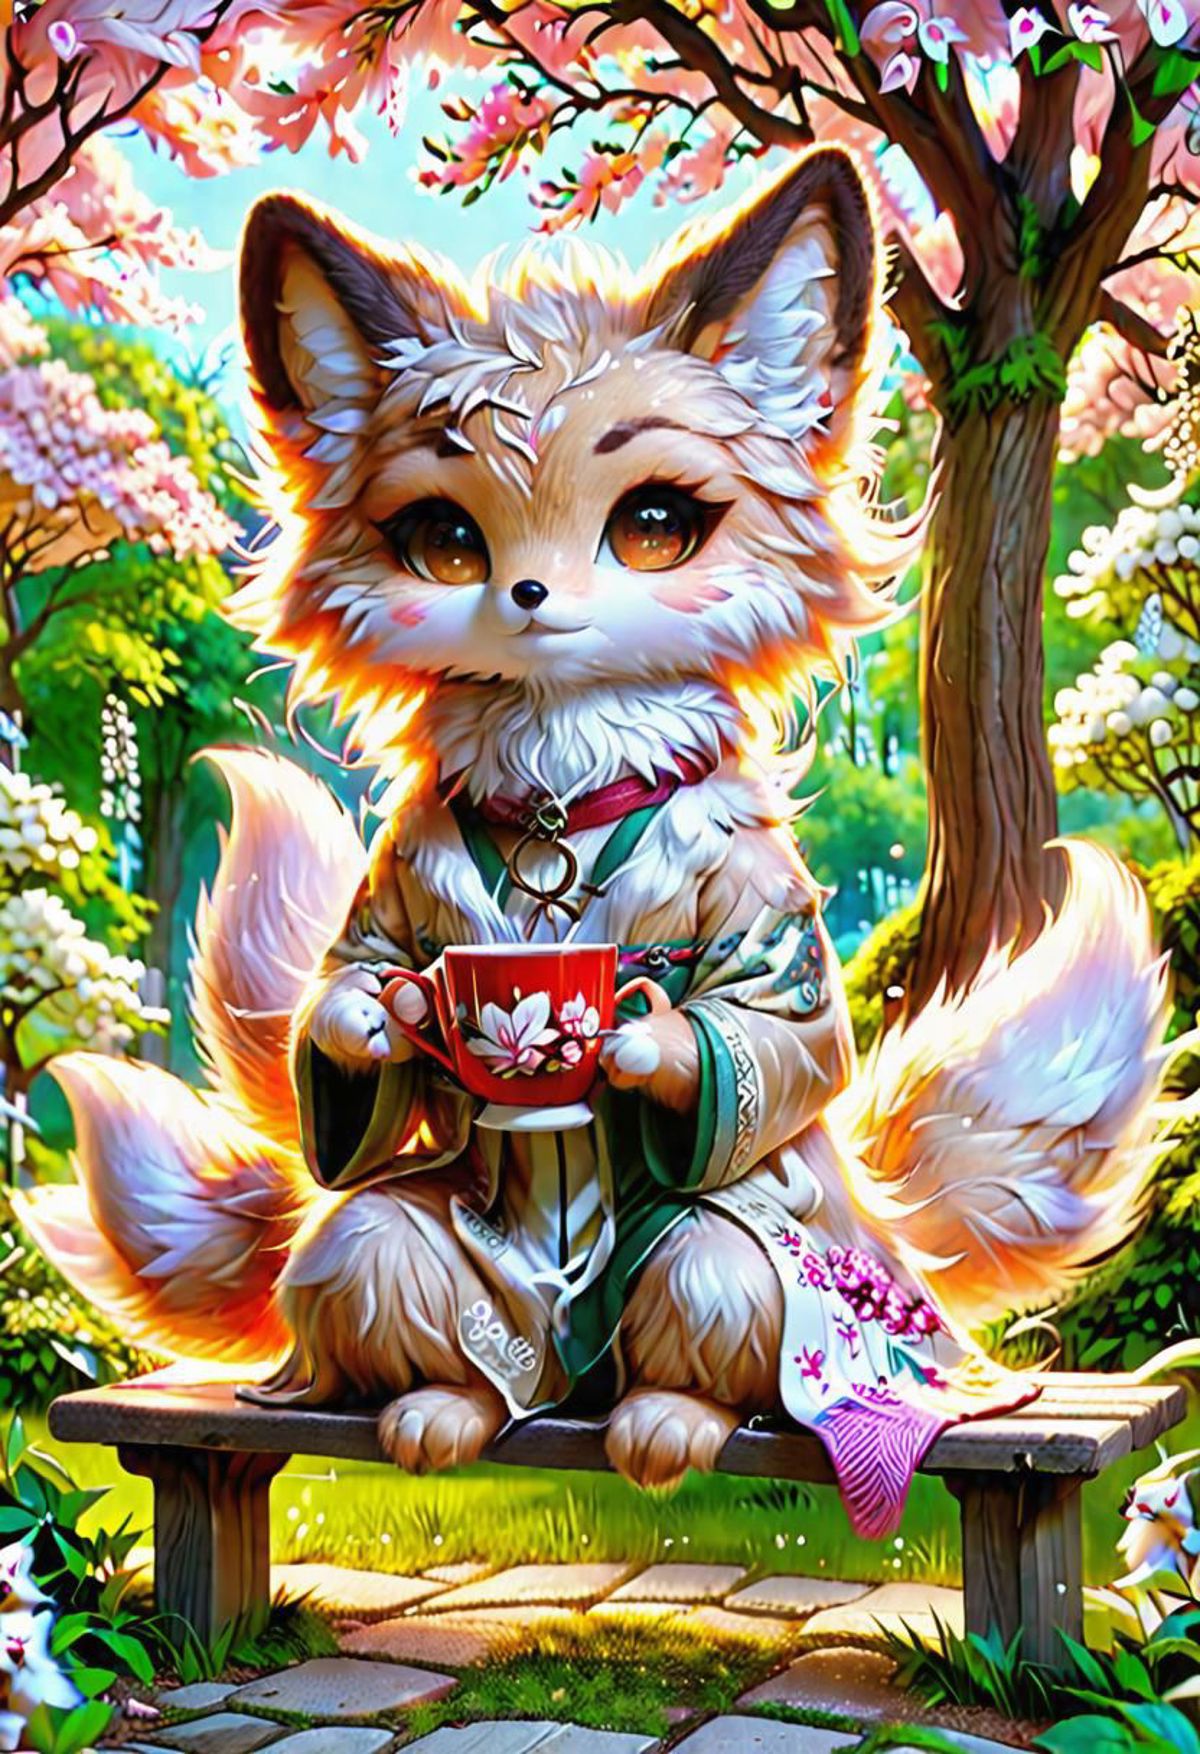 A fox-like creature wearing a green robe and holding a cup.